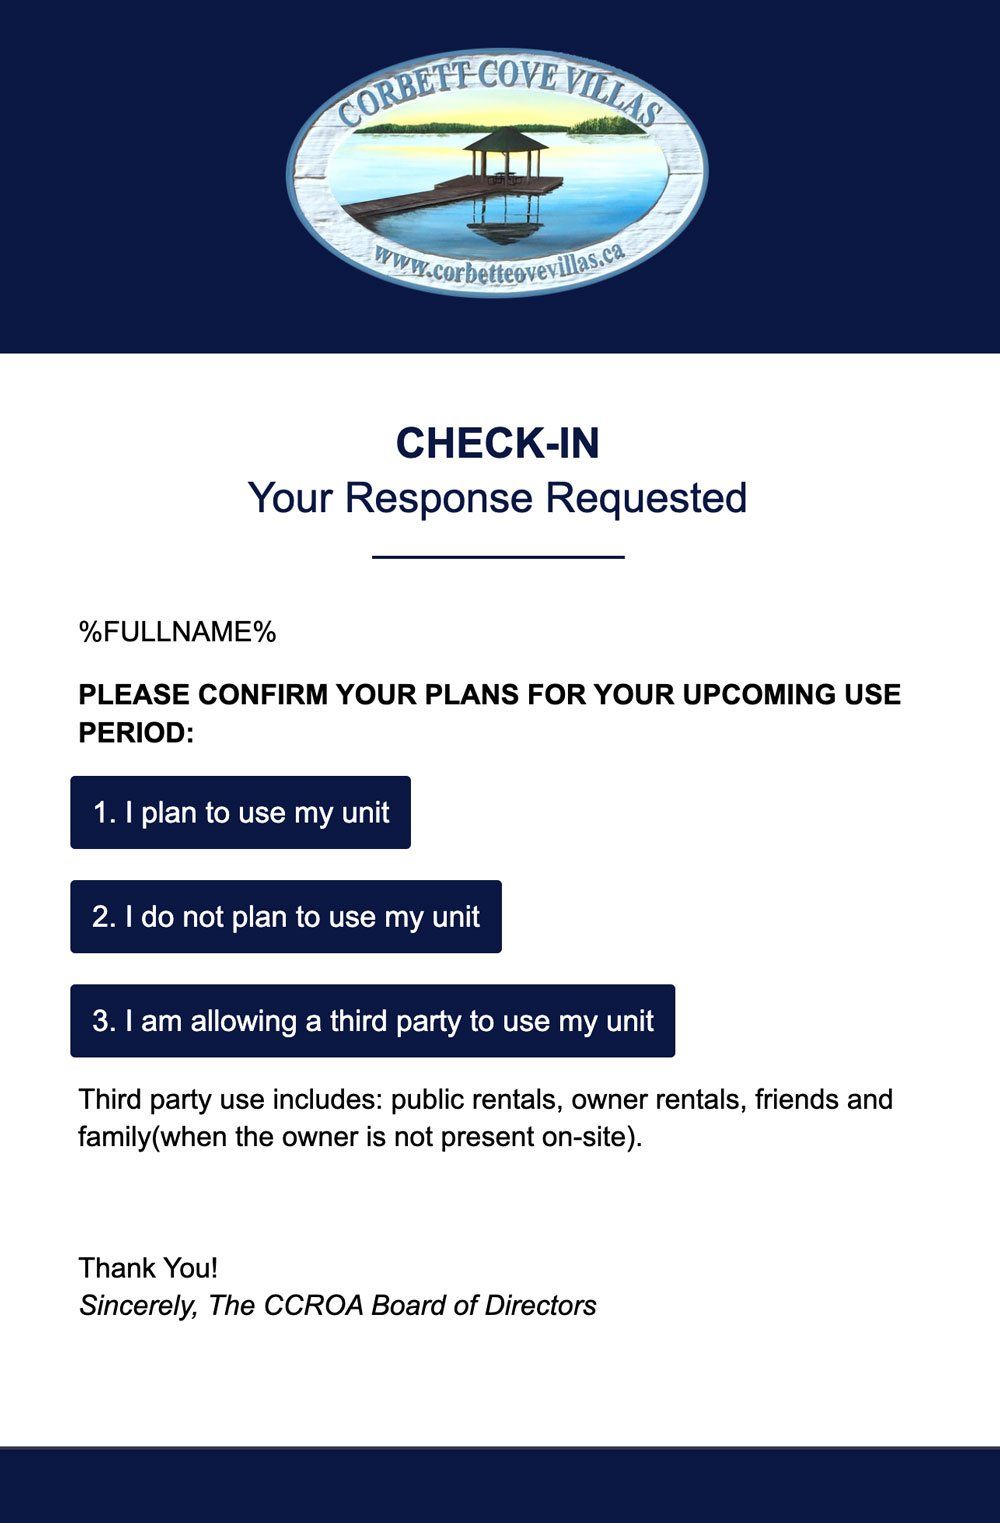 Example of Check-in Email